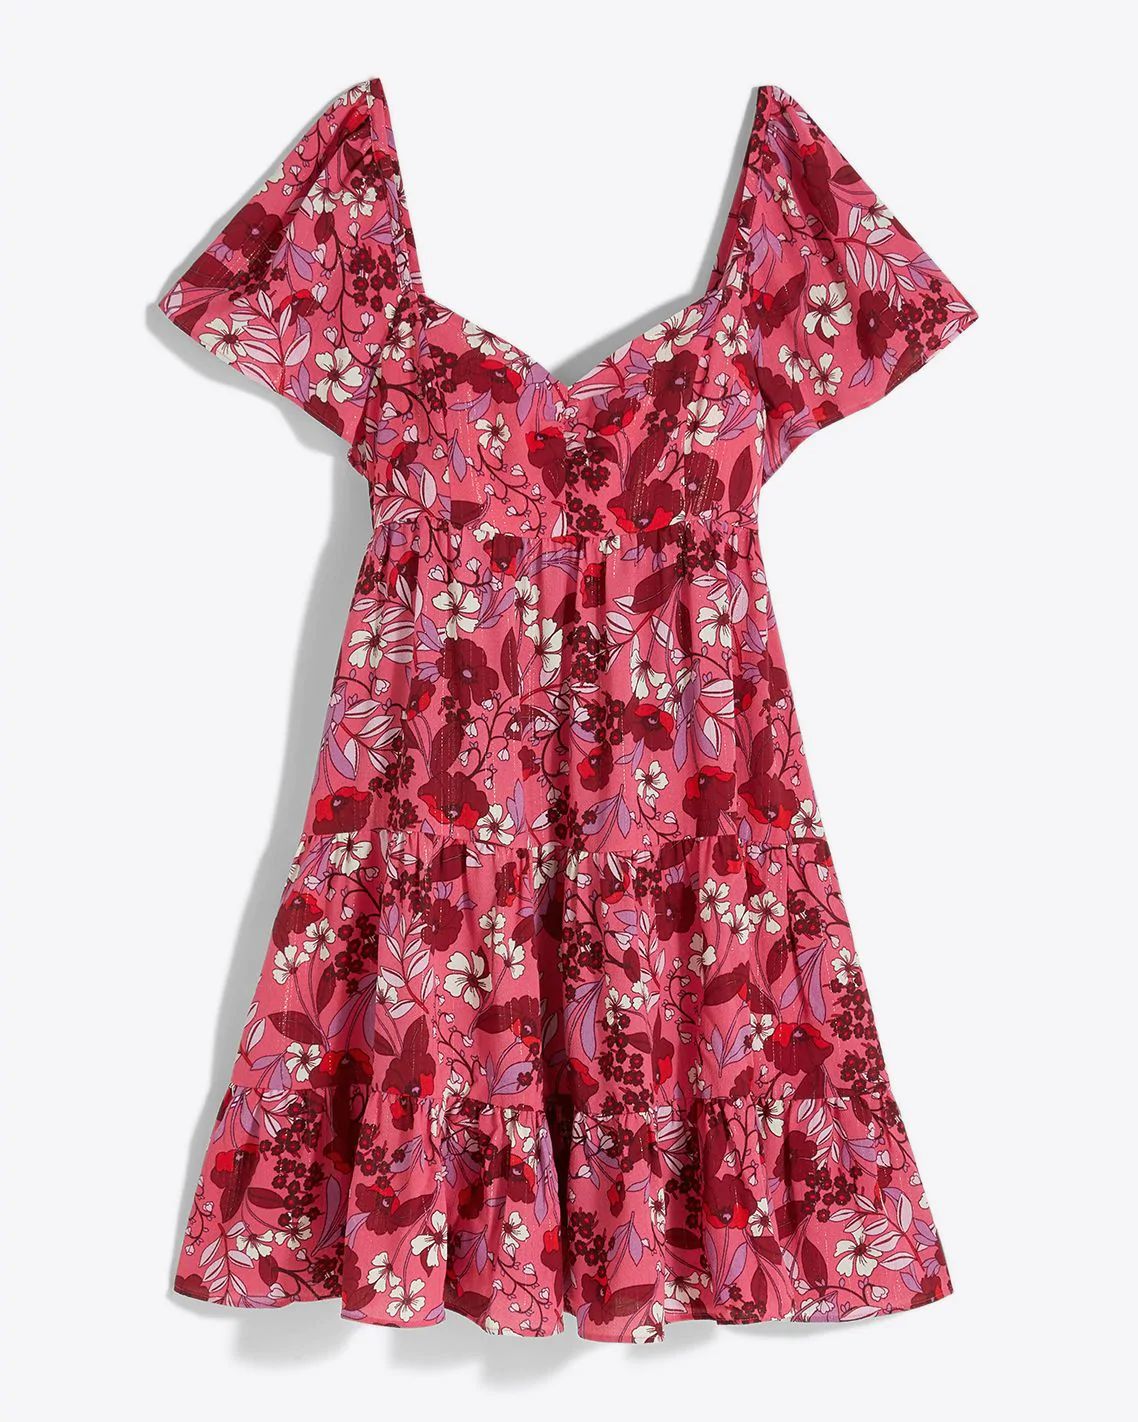 Emily Mini Dress in Raspberry Clematis Floral | Draper James (US)